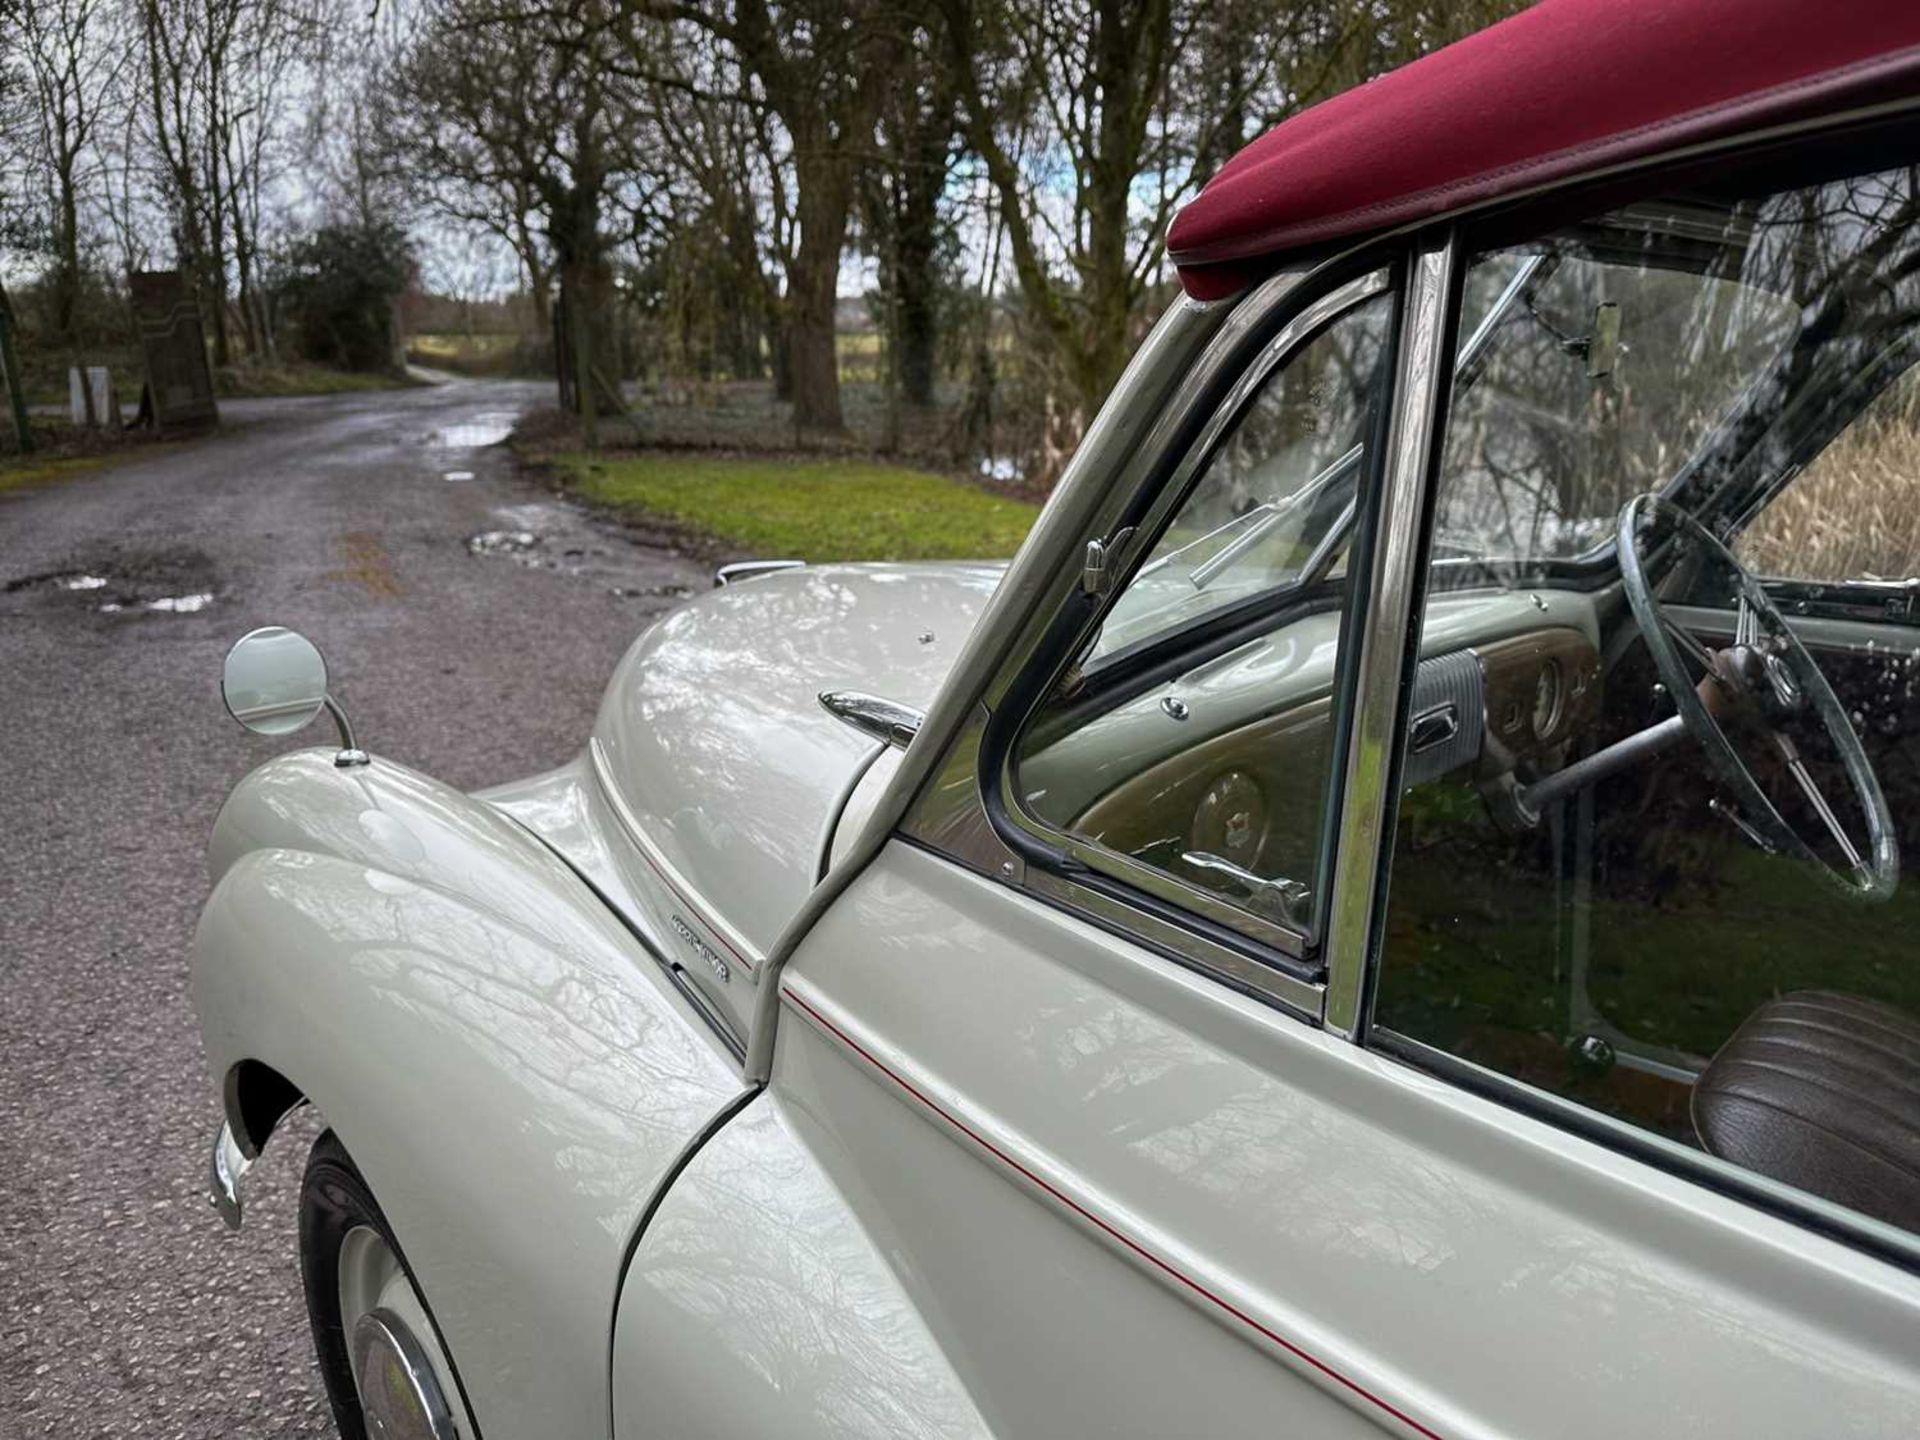 1954 Morris Minor Tourer Fully restored to concours standard - Image 78 of 100